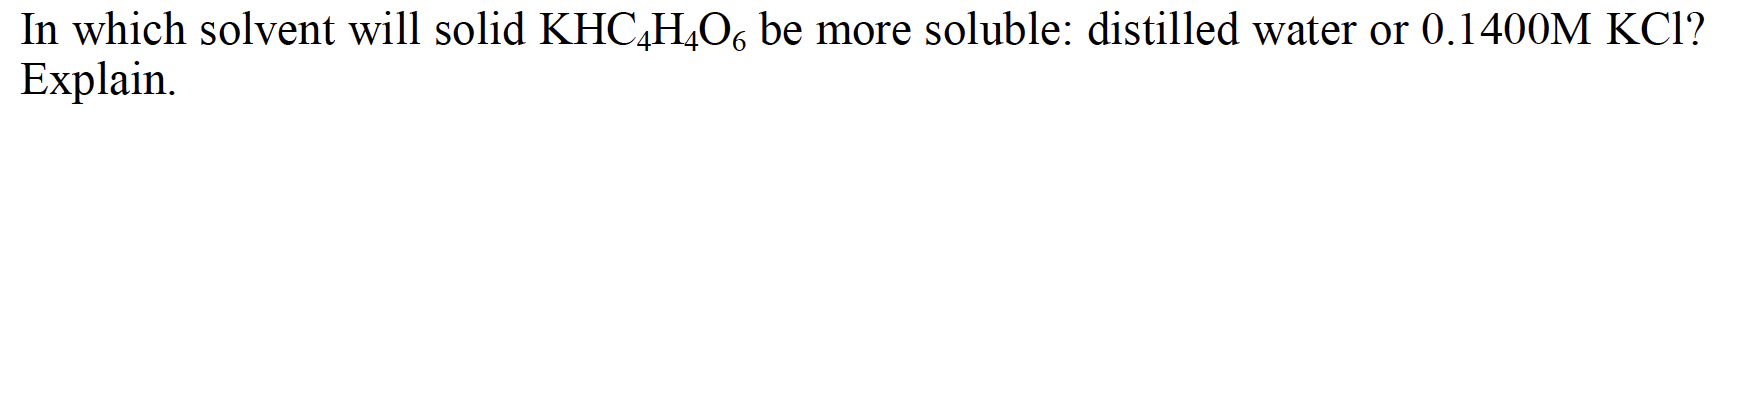 In which solvent will solid KHC,H,O, be more soluble: distilled water or 0.1400M KCI?
Explain.
